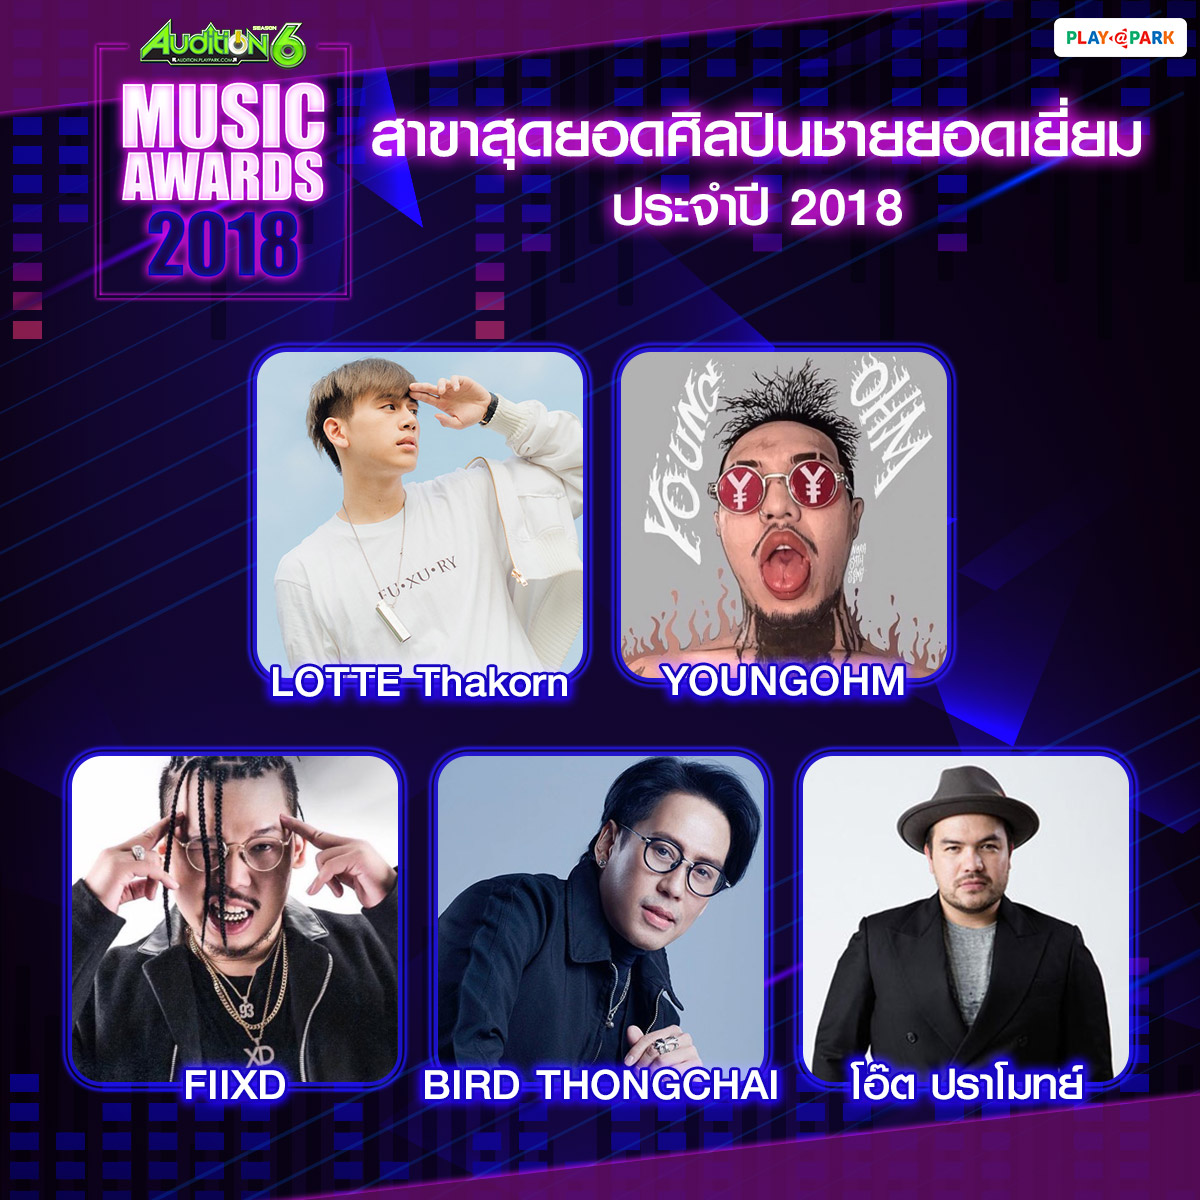 [AUDITION] AUDITION MUSIC AWARD 2018  